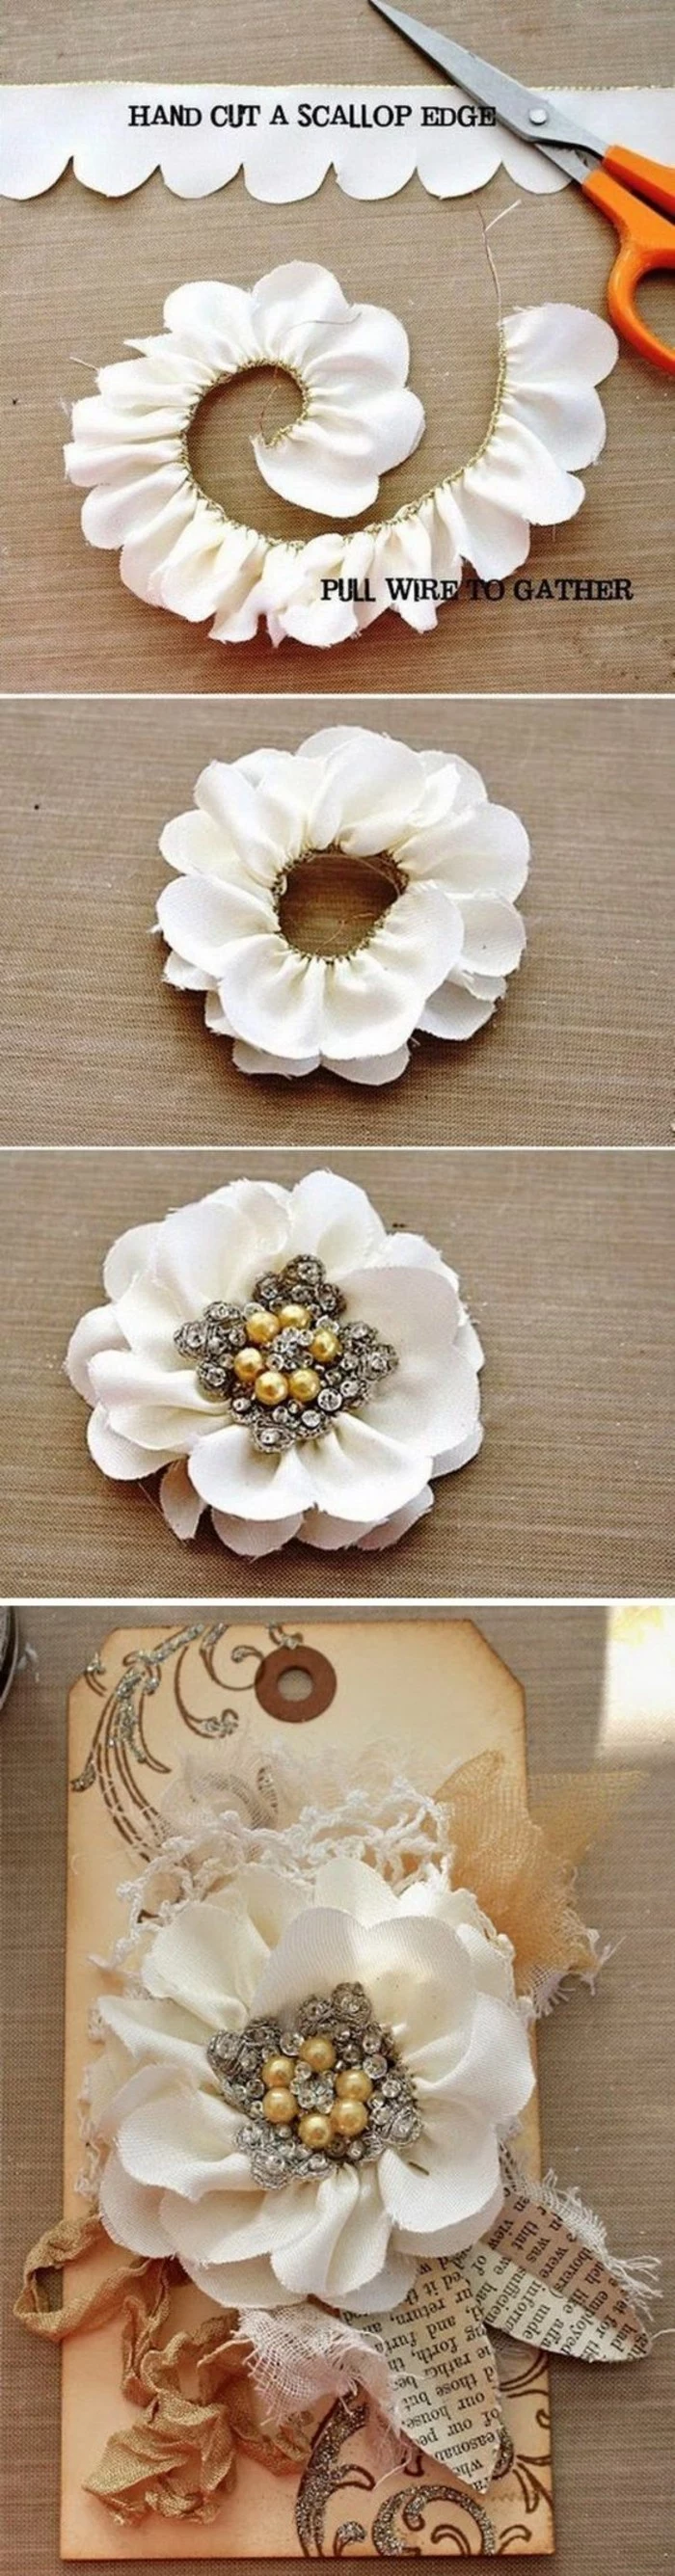 rose made of fabric, white fabric, creative birthday ideas for best friend, step by step, diy tutorial